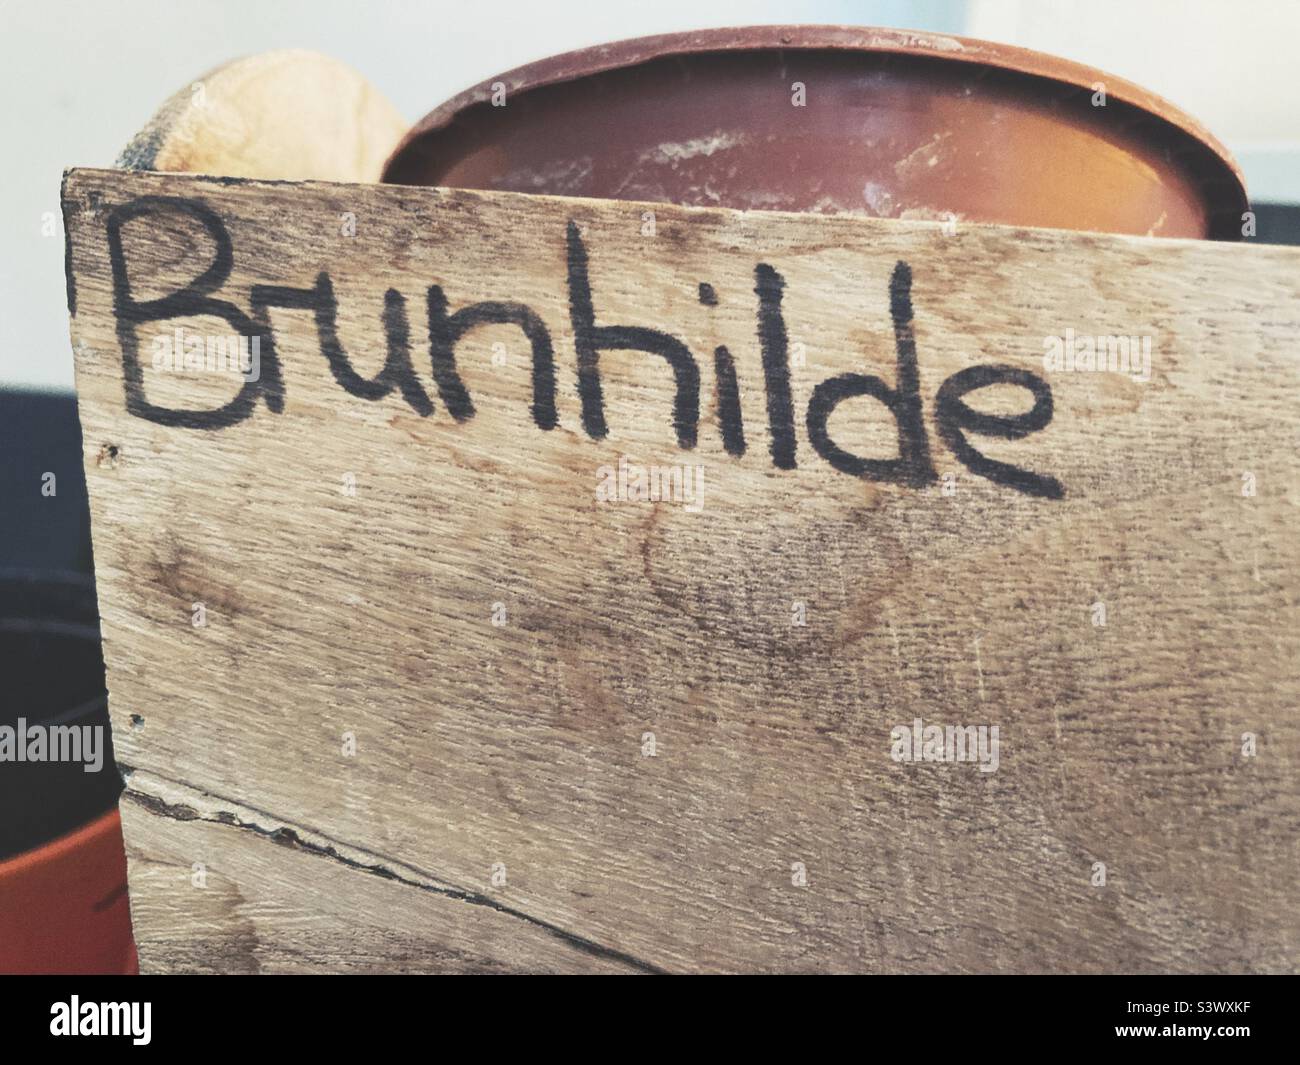 The Name Brunhilde written on a wooden board Stock Photo